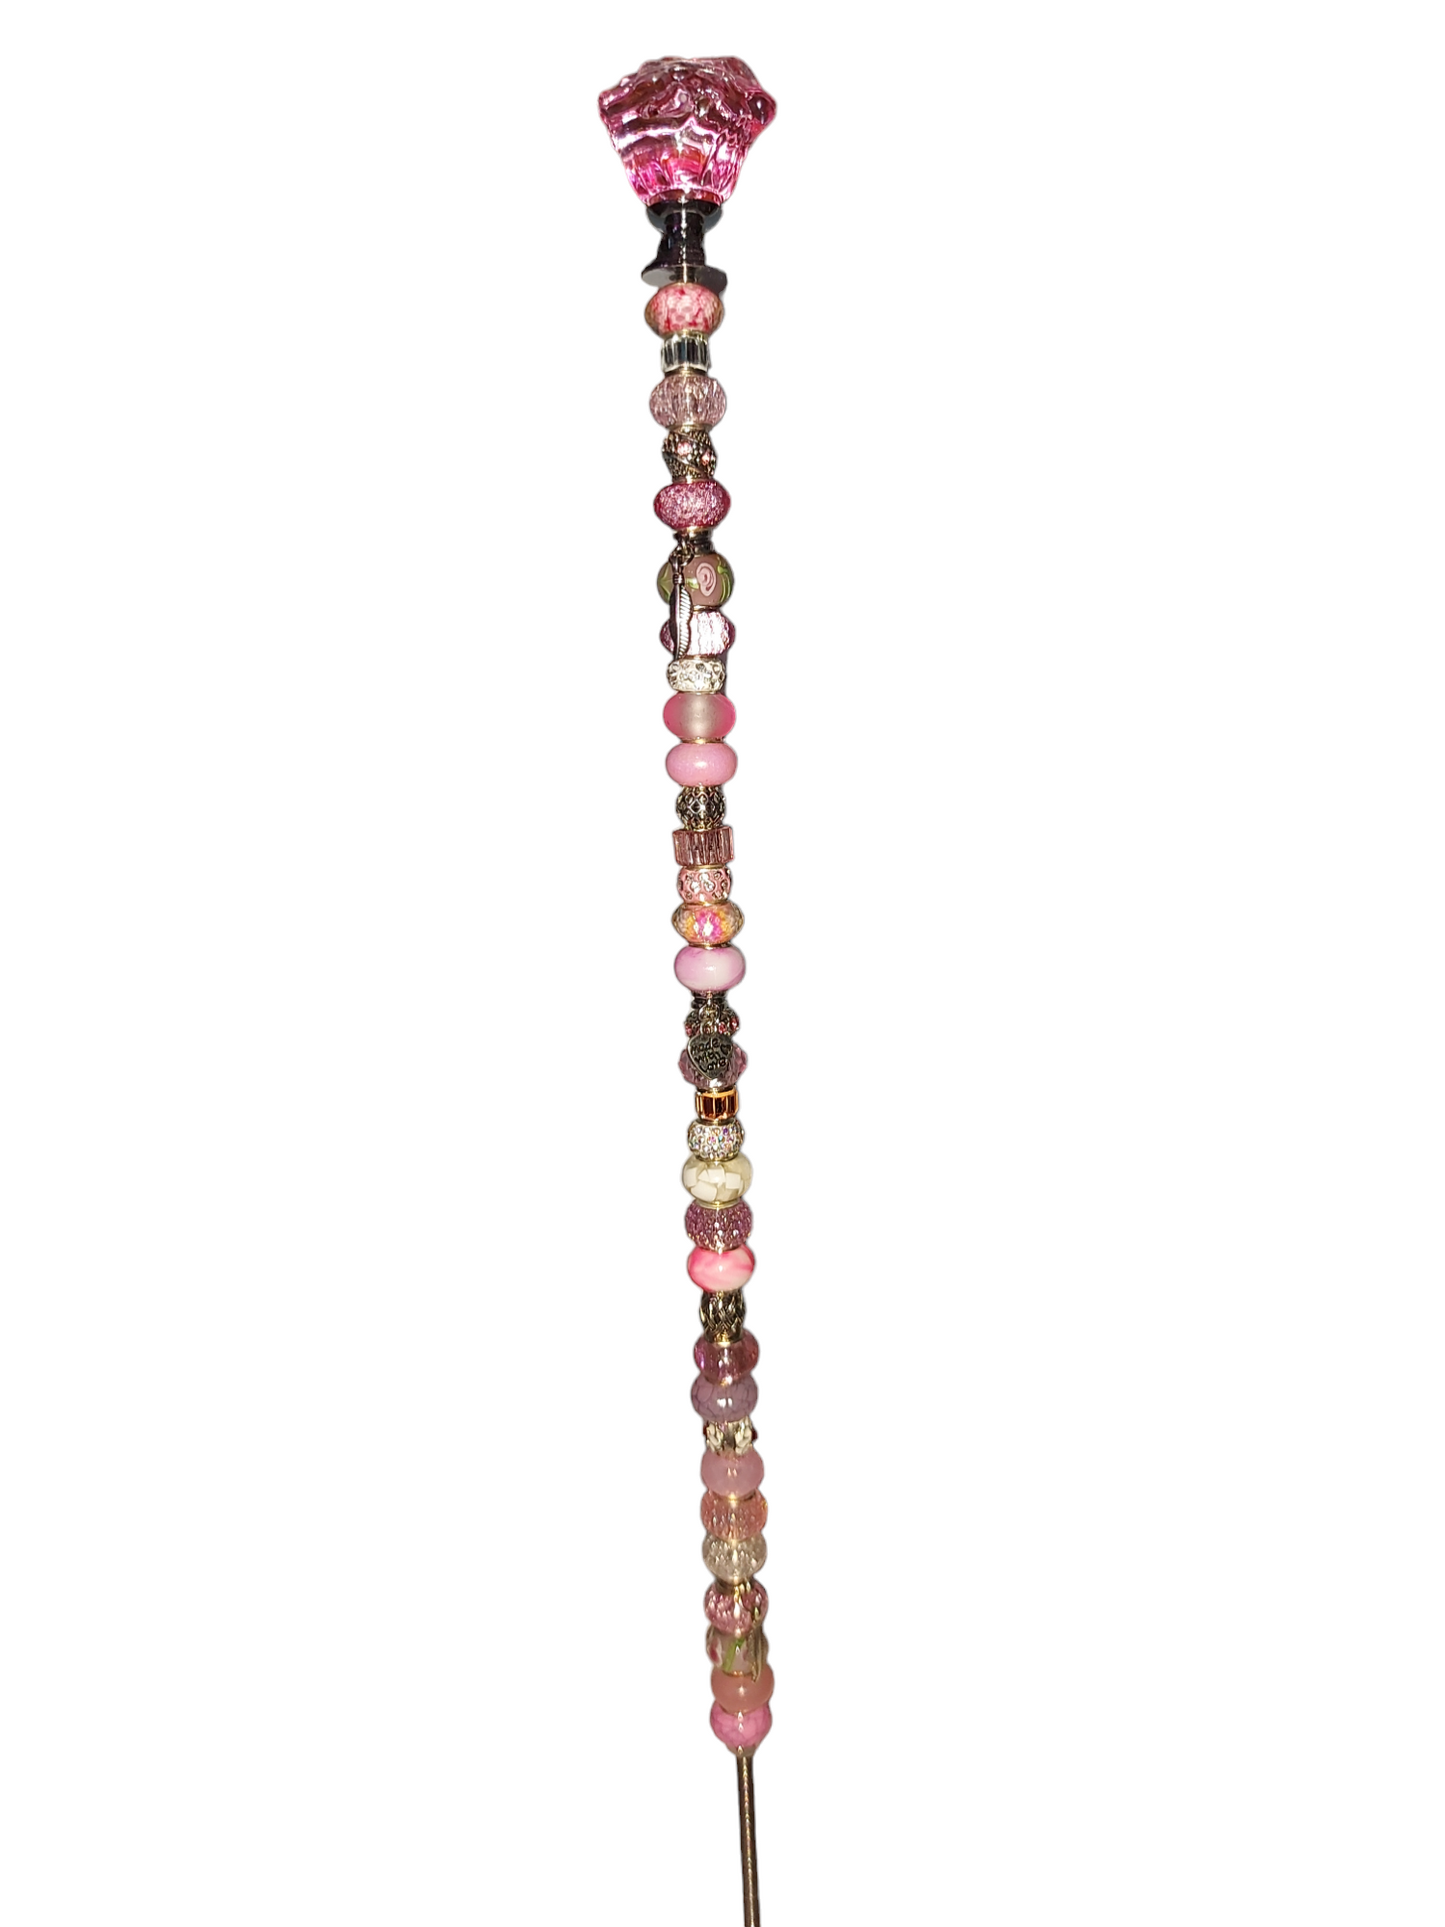 Garden Wands with Crystal 'Rose" Topper -  17 inch